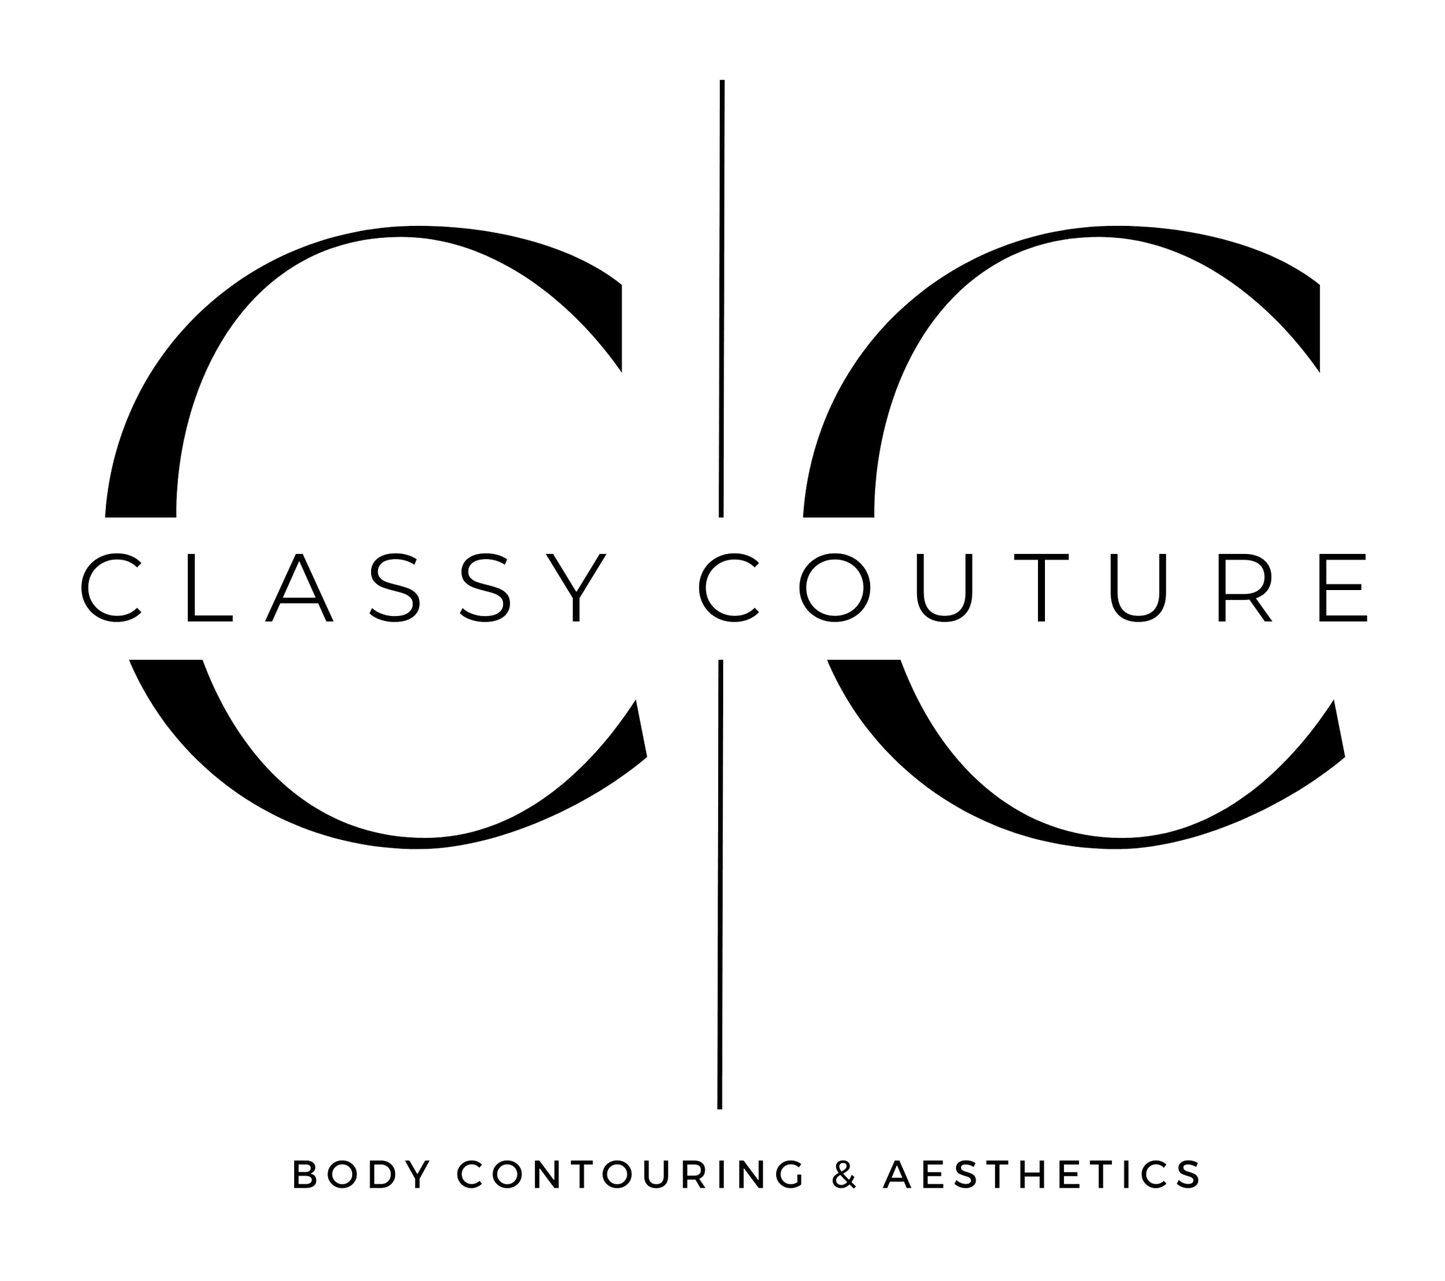 Custom Business Signage for Classy Couture Body Contouring Business Sign - VividEditions